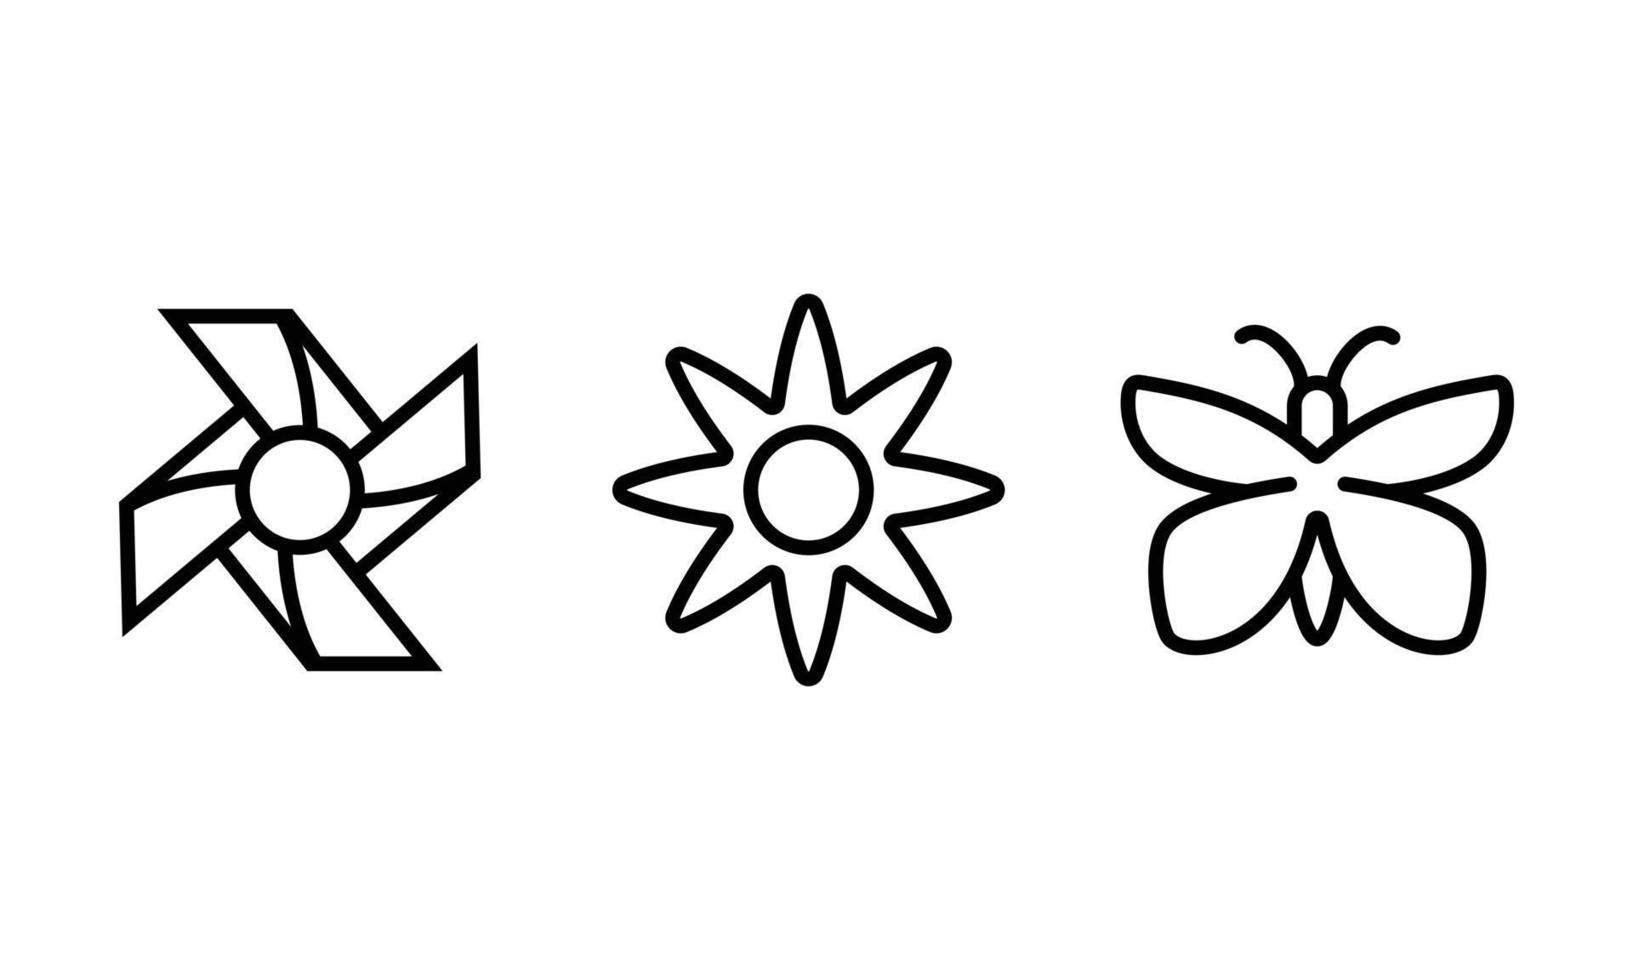 editable icon set related to gardening activities vector